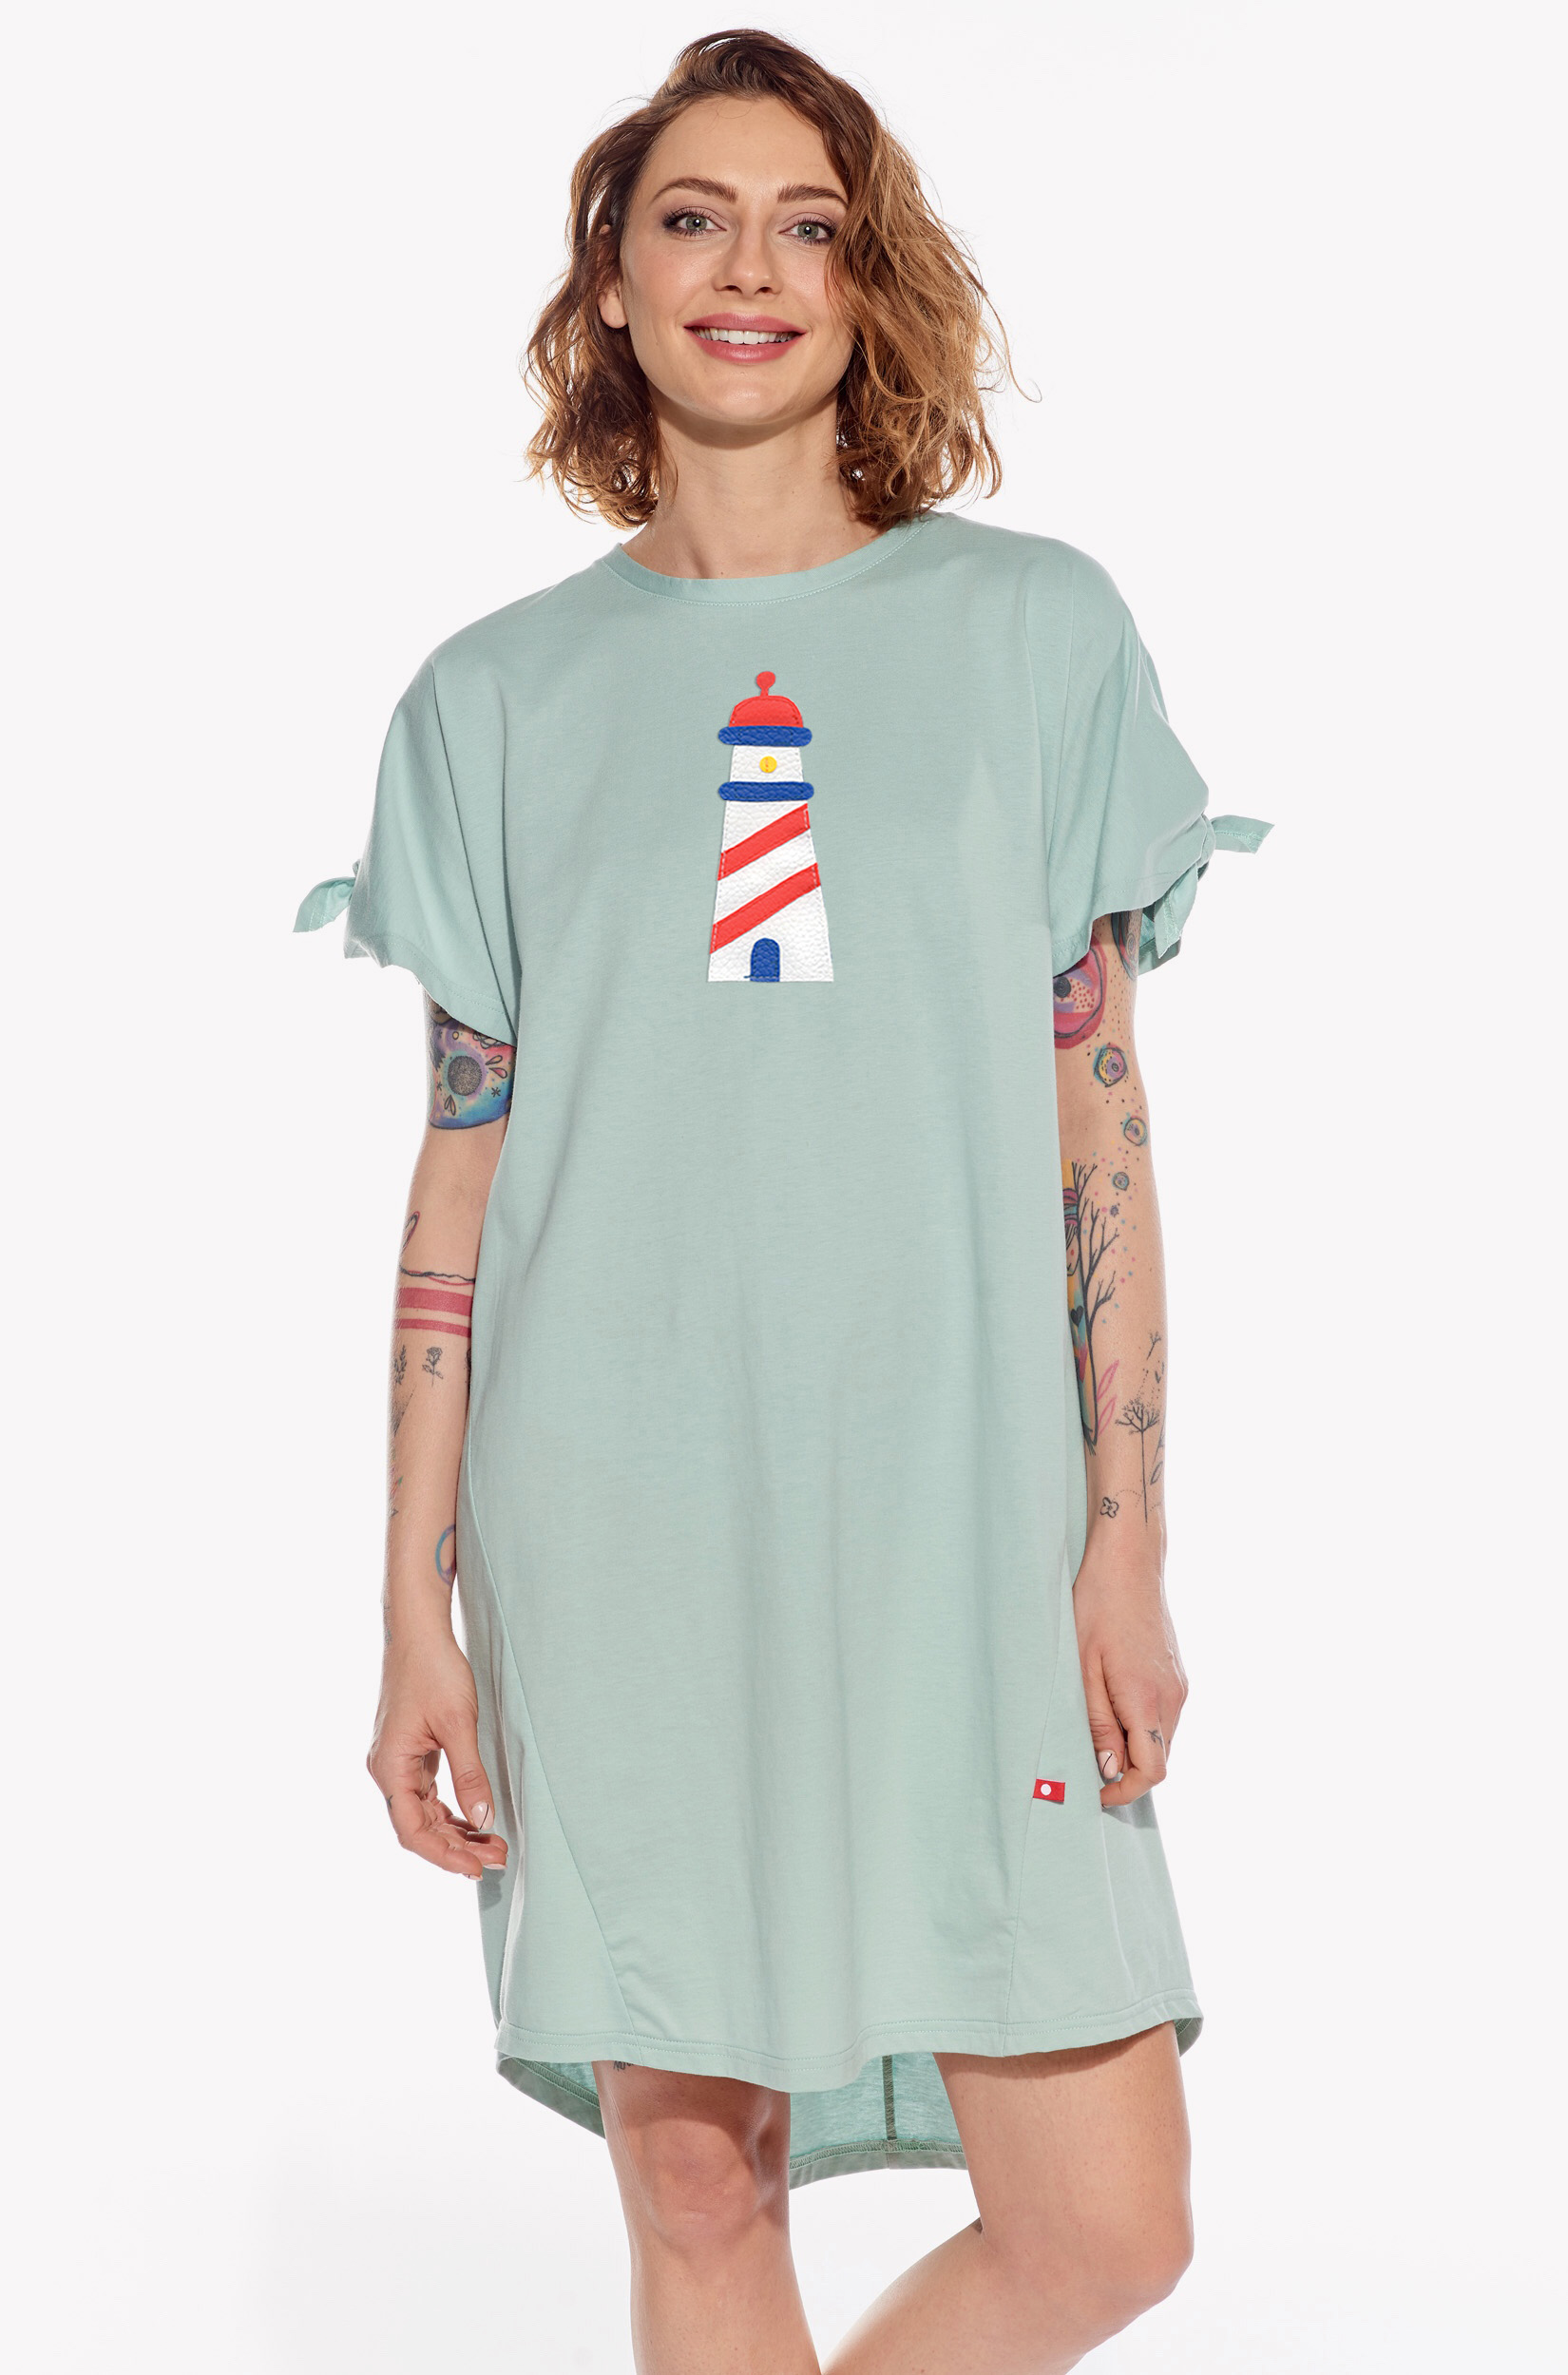 Dresses with lighthouse